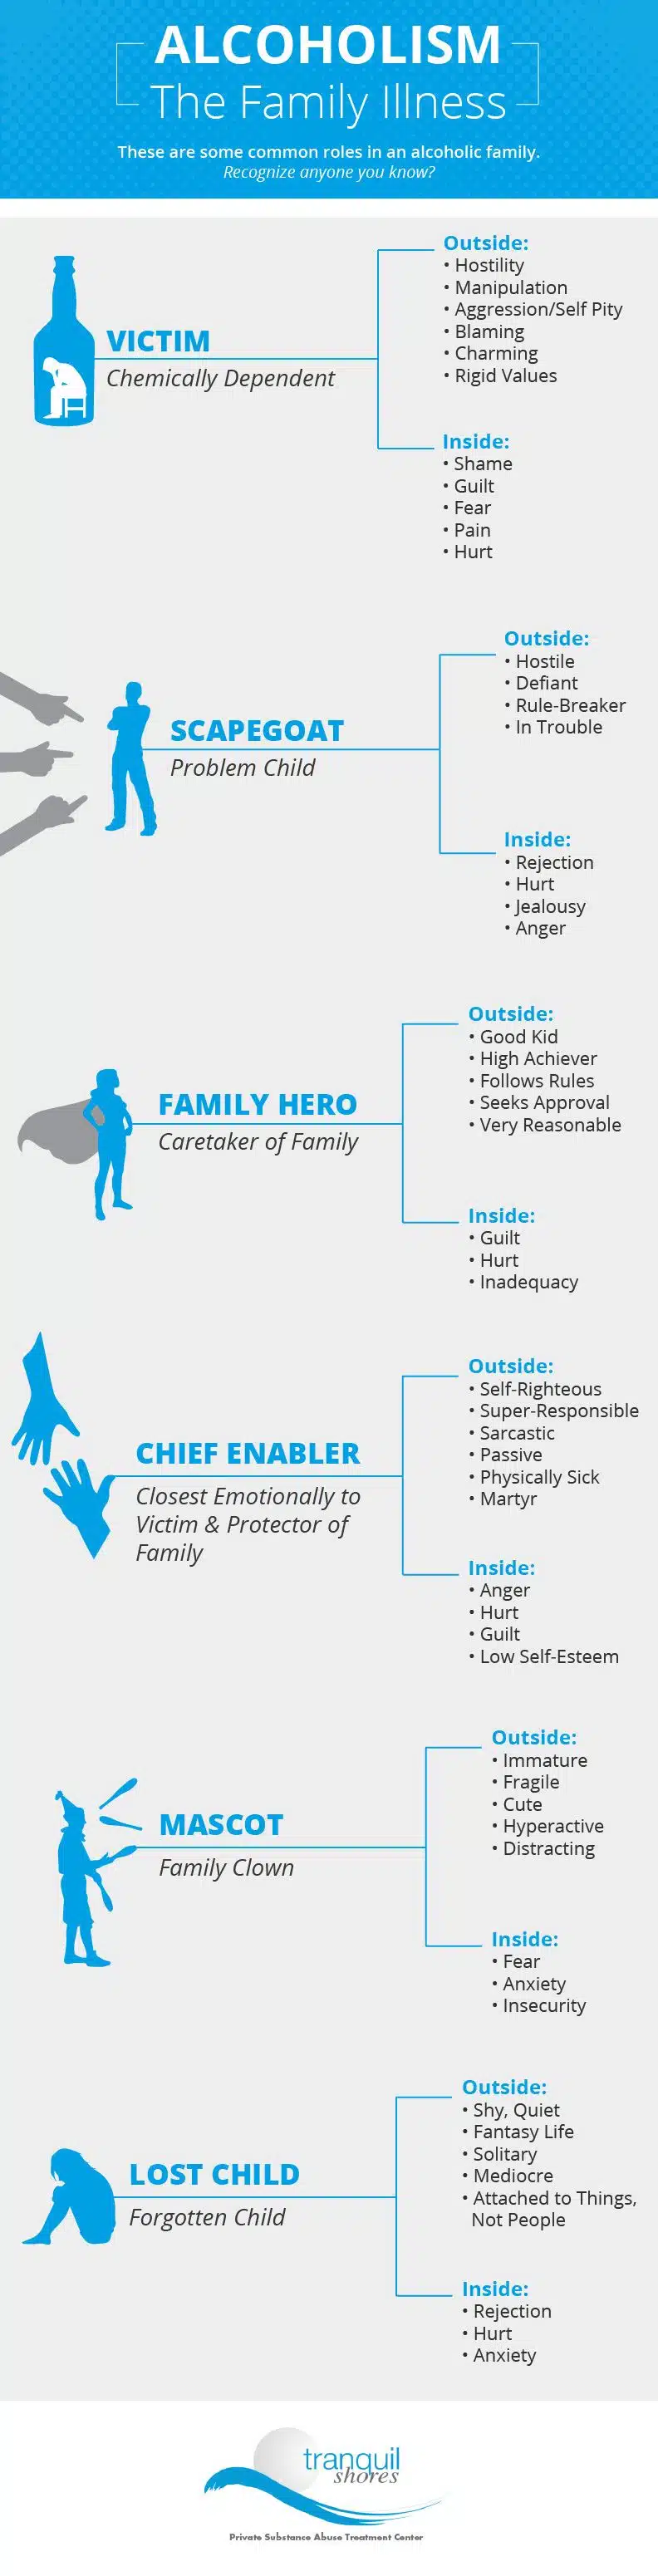 The Family roles for alcoholism